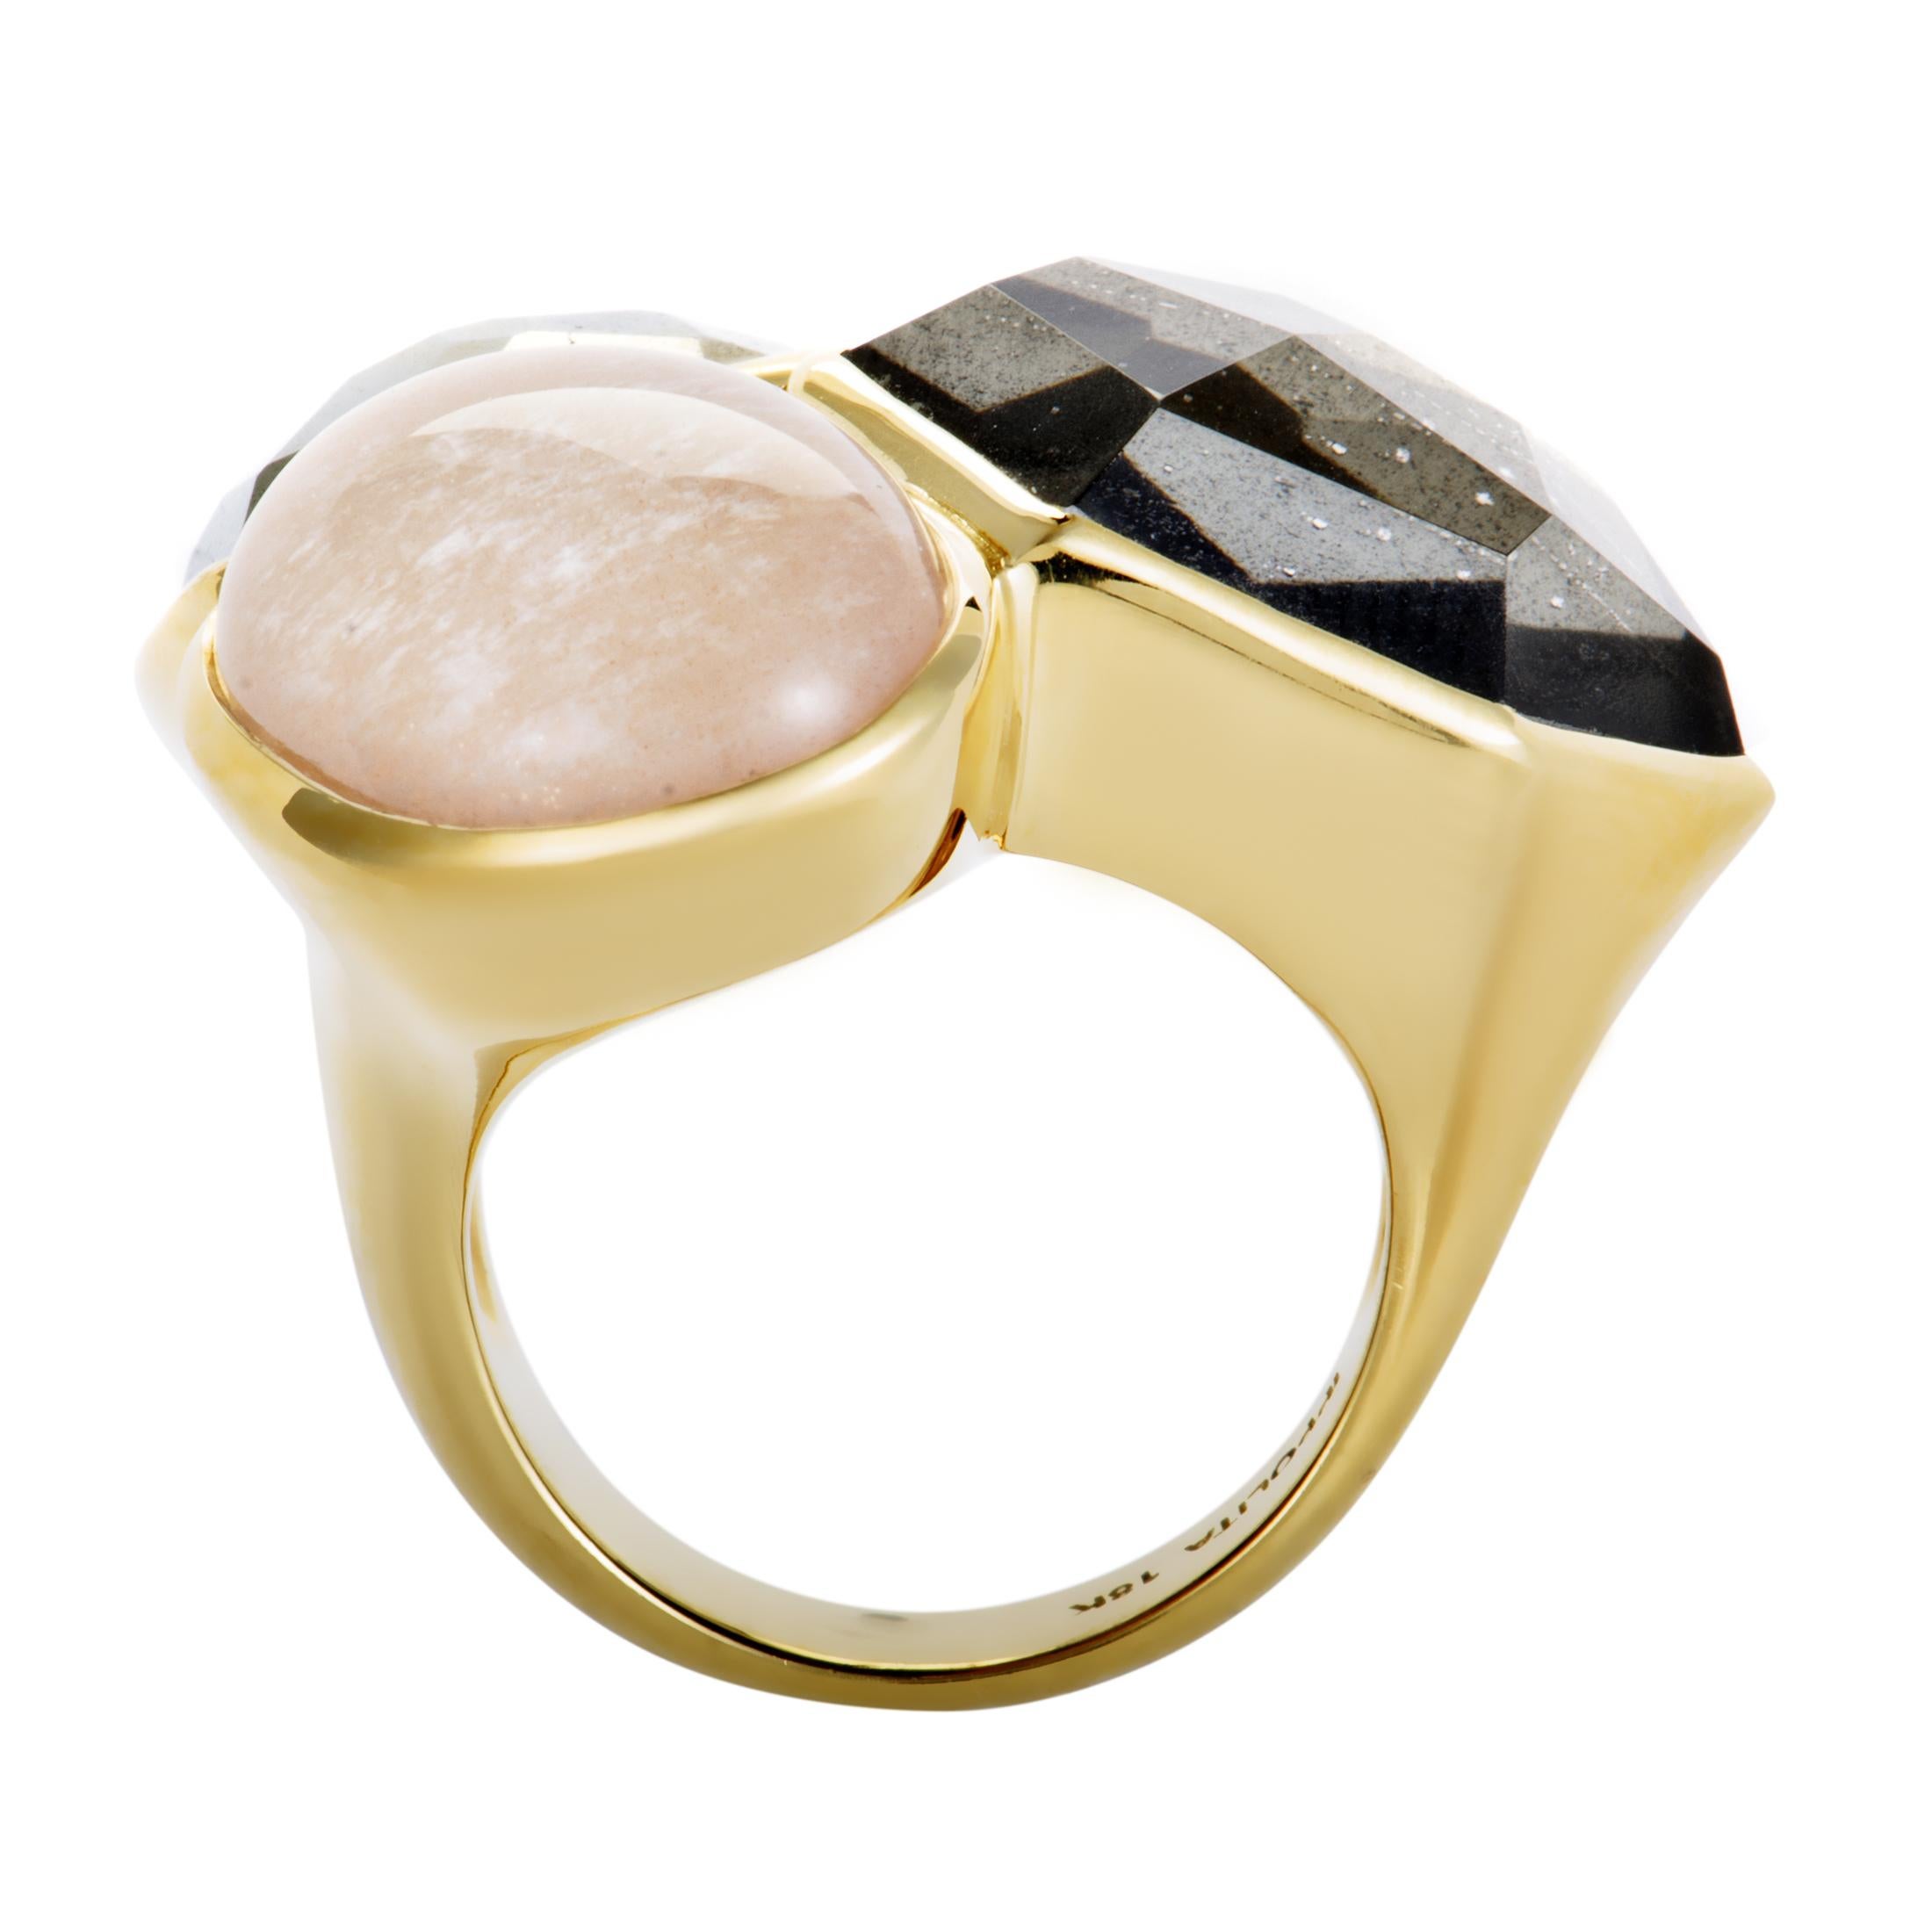 Focusing on perfectly combining the immaculately smooth gleam of luxurious 18K yellow gold with the exquisite cut and diverse colors of fantastic gems, Ippolita created this remarkable ring for the esteemed “Rock Candy” collection.
Ring Top